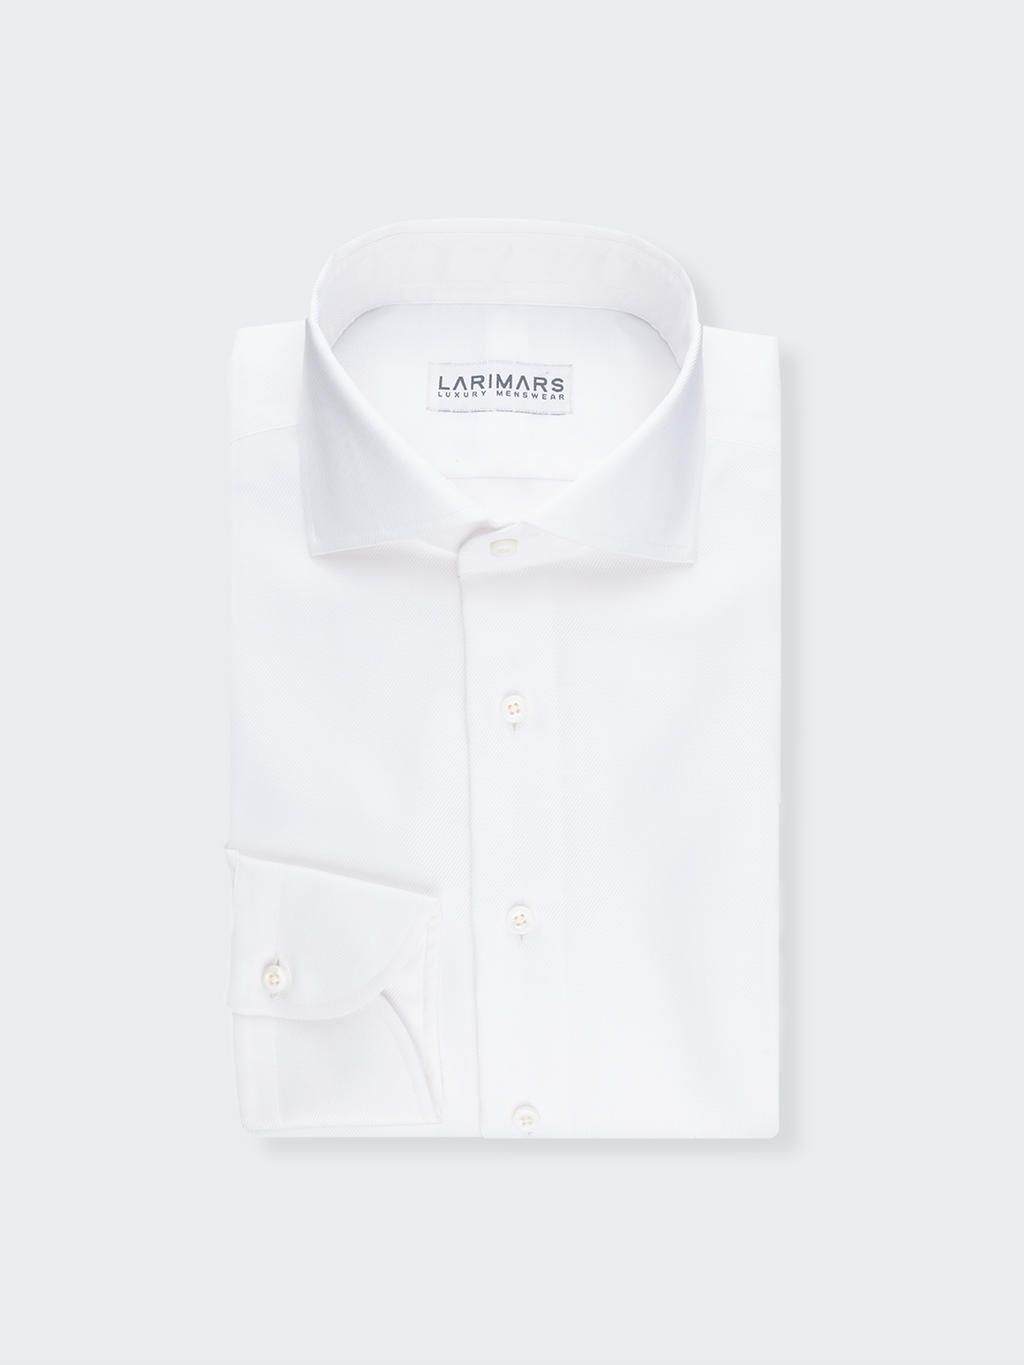 White Royal Twill | Wrinkle Resistant